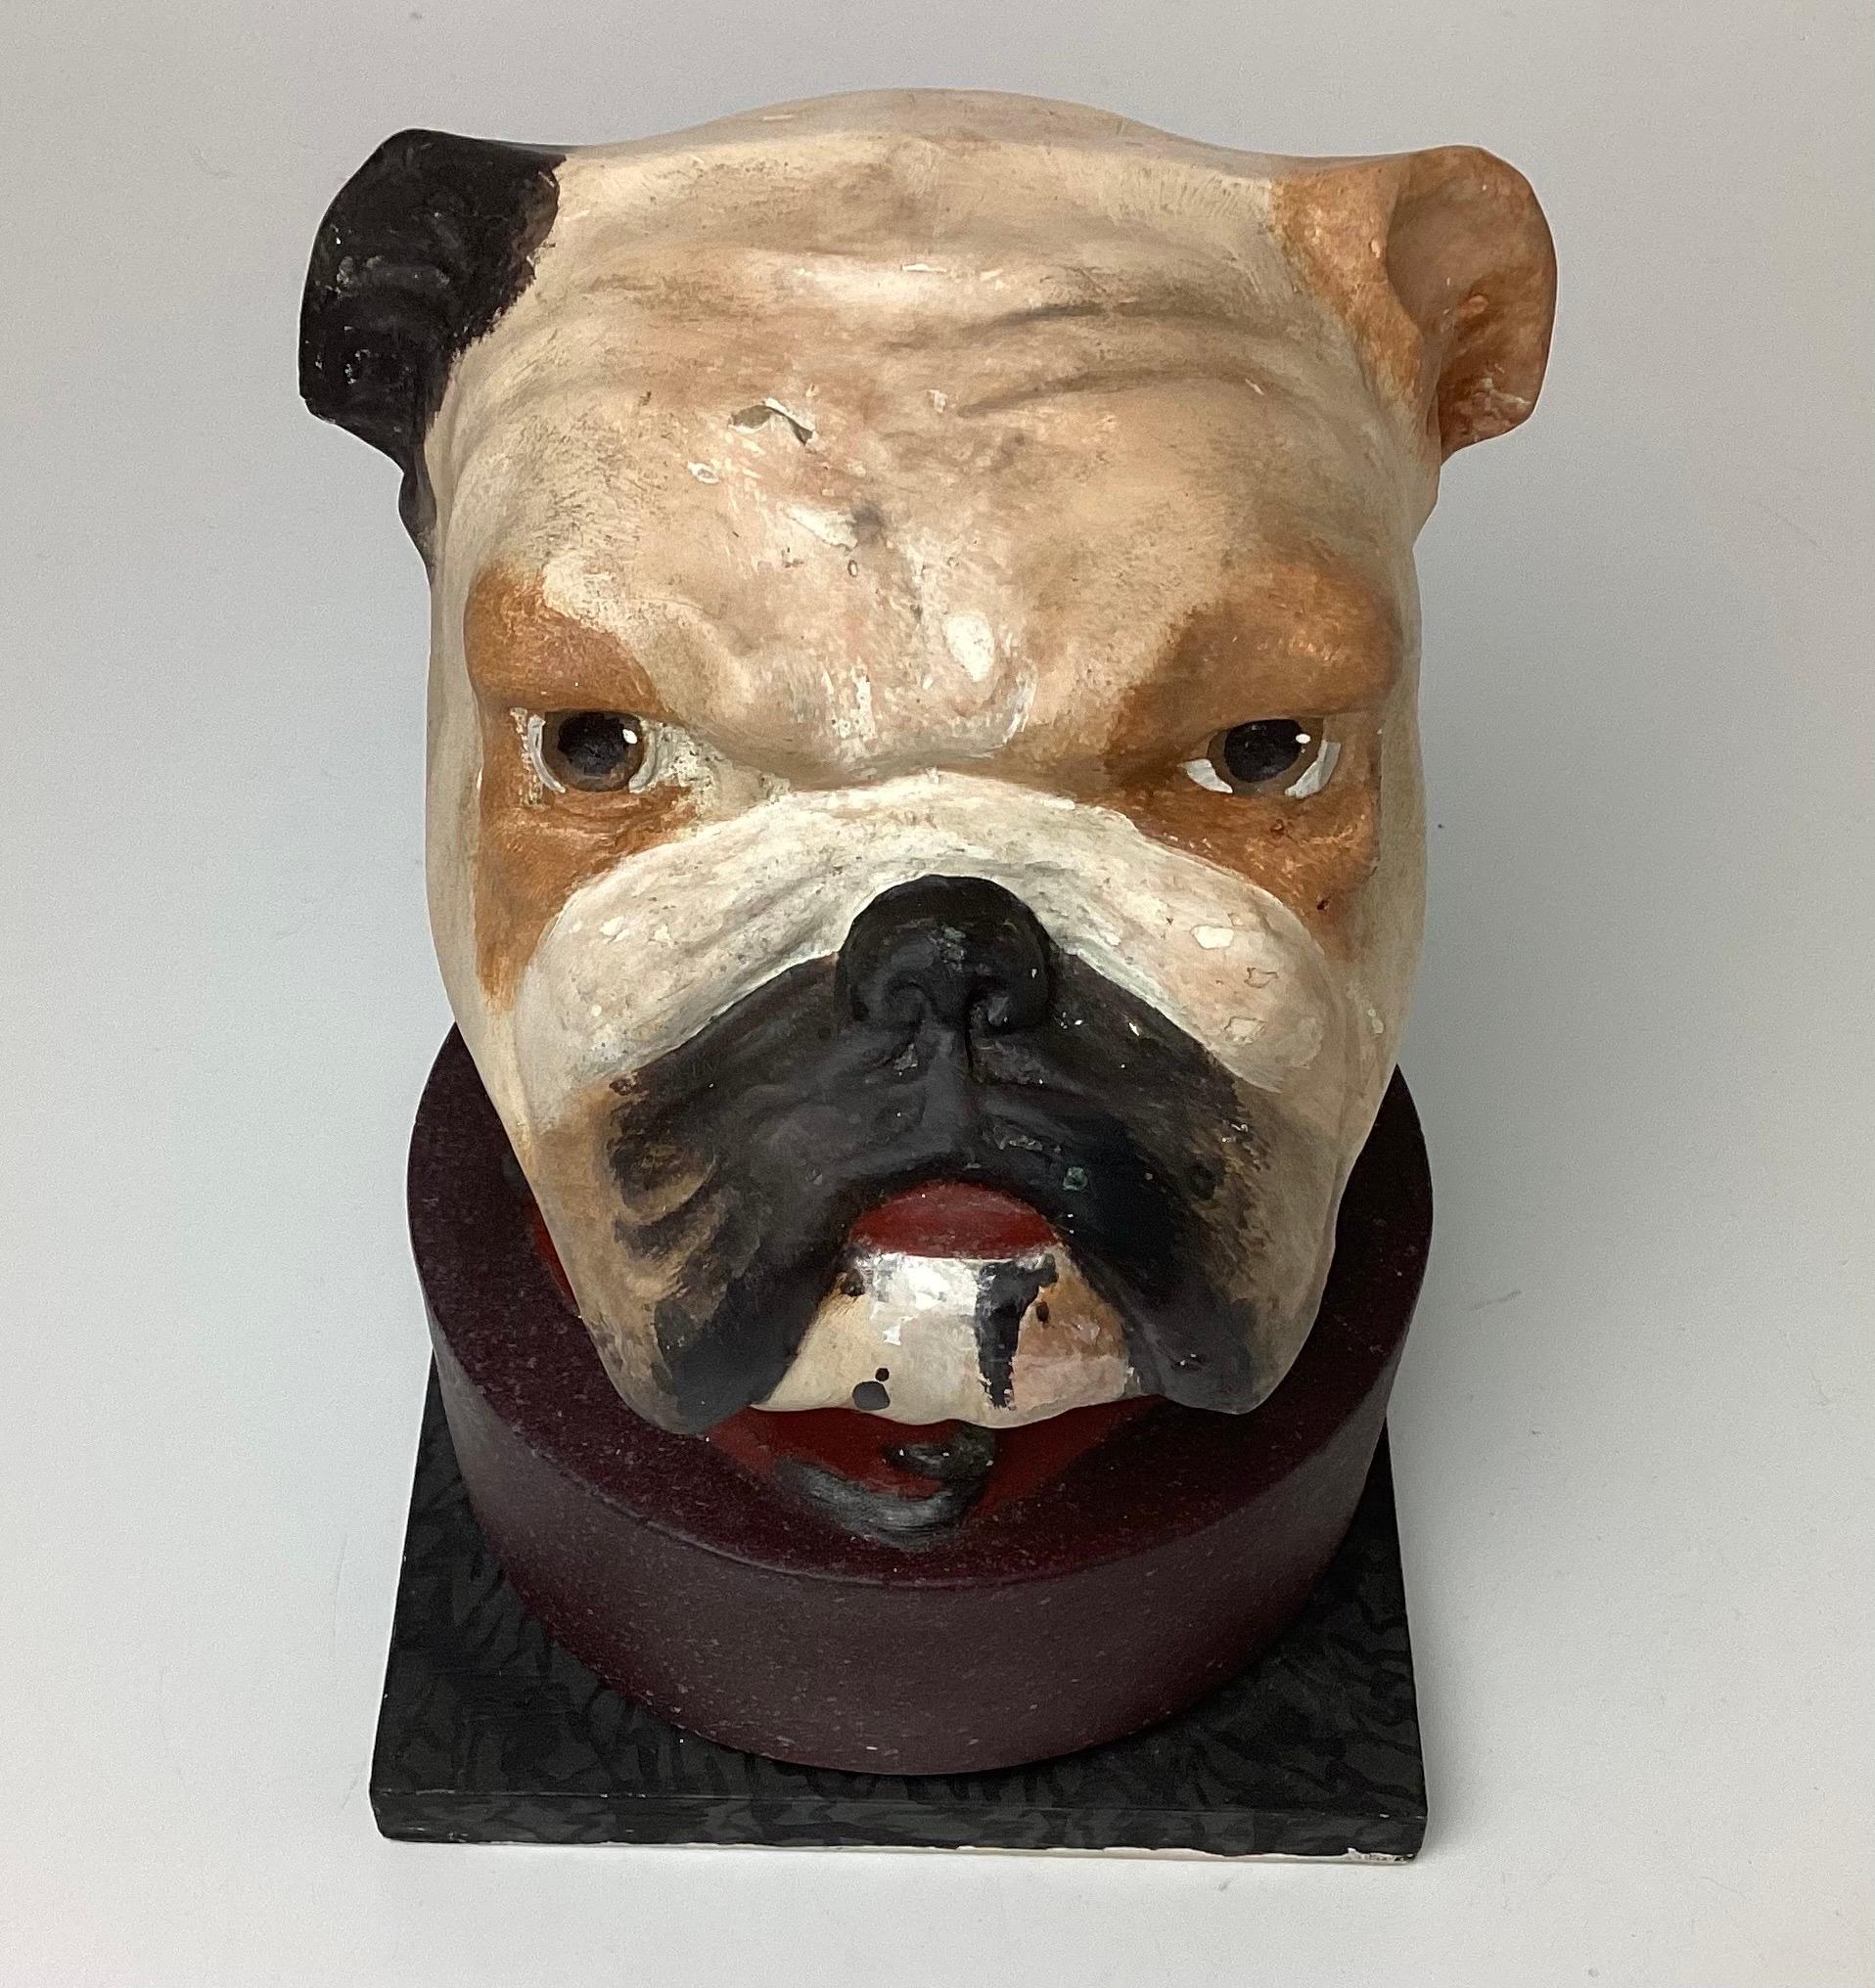 English bulldog head papier-mâché collar box. This is just wonderful. Made of Papier-mâché, composition and cardboard. Still has a collar inside. Good age appropriate wear with some chipping and re-paint. No dents or brakes.